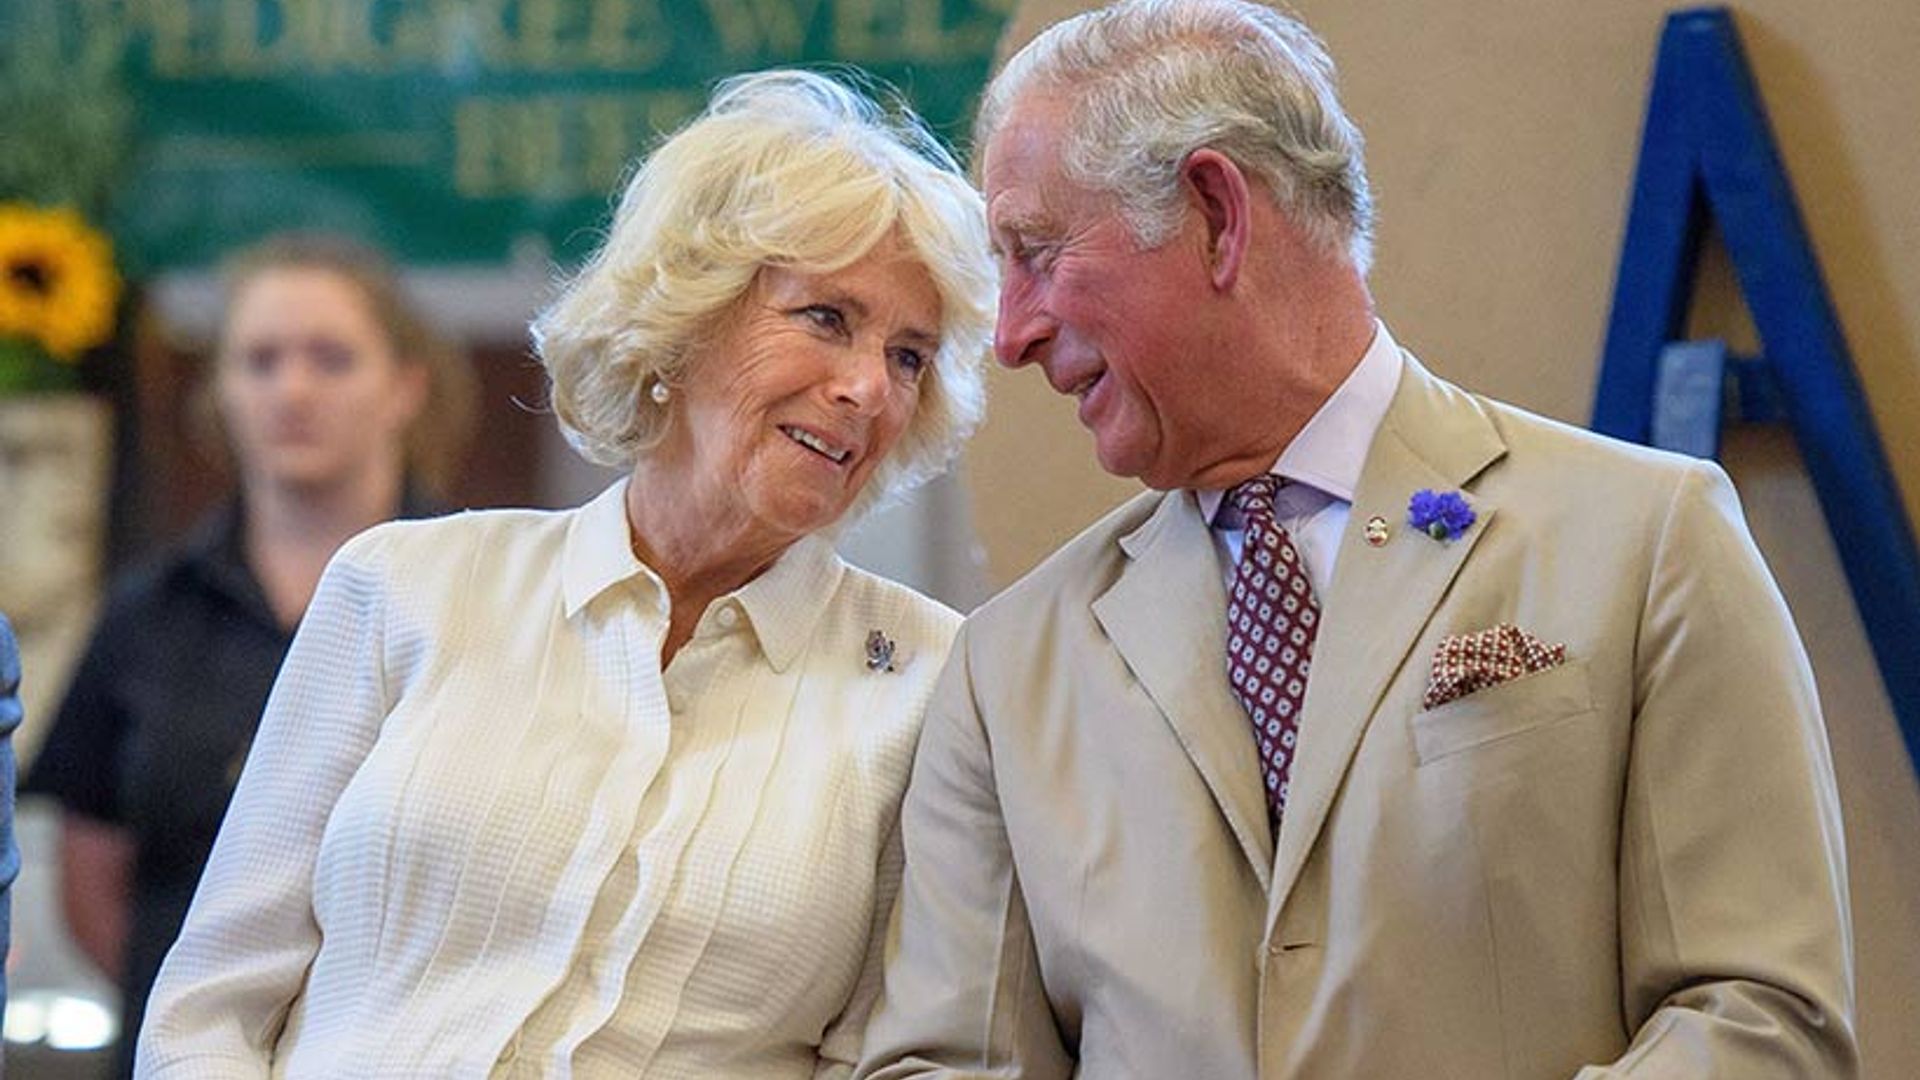 Camilla Parker-Bowles looks dreamy in a cream dress on visit to Wales ...